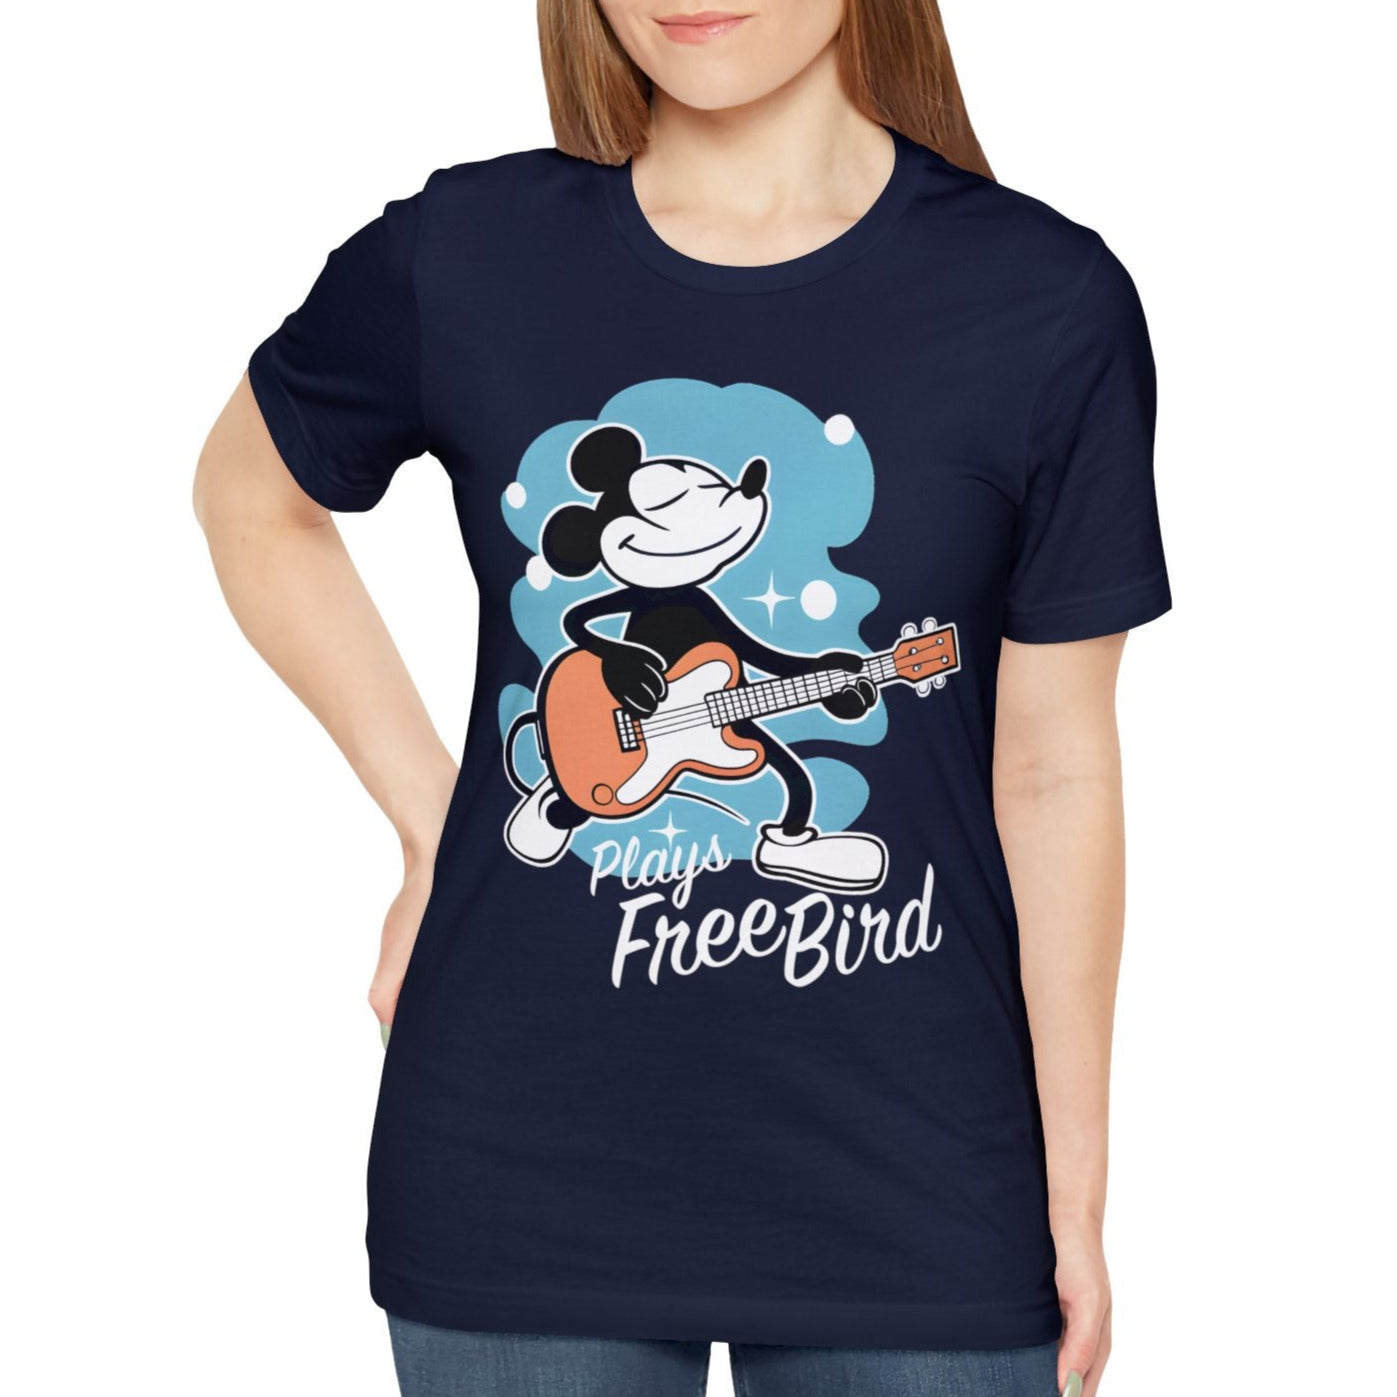 Happy MOUSE Plays Free Bird T-Shirt, Gift for Guitar or Bass Player, Music or Animation Fan on Unisex Bella+Canvas Tee, Dark Colors